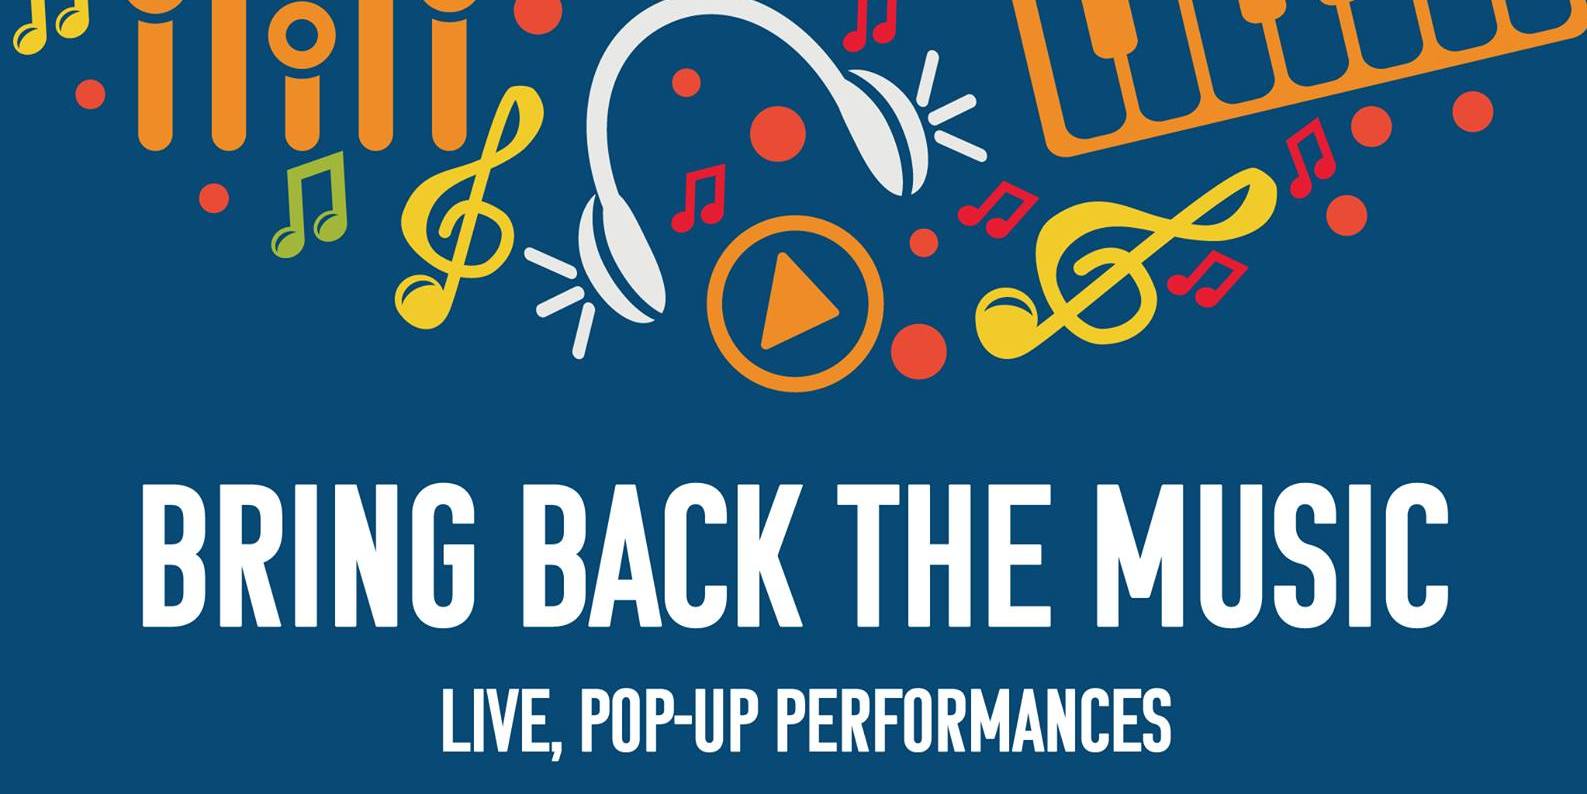 Bring Back The Music Pop-Up Performance promotional image